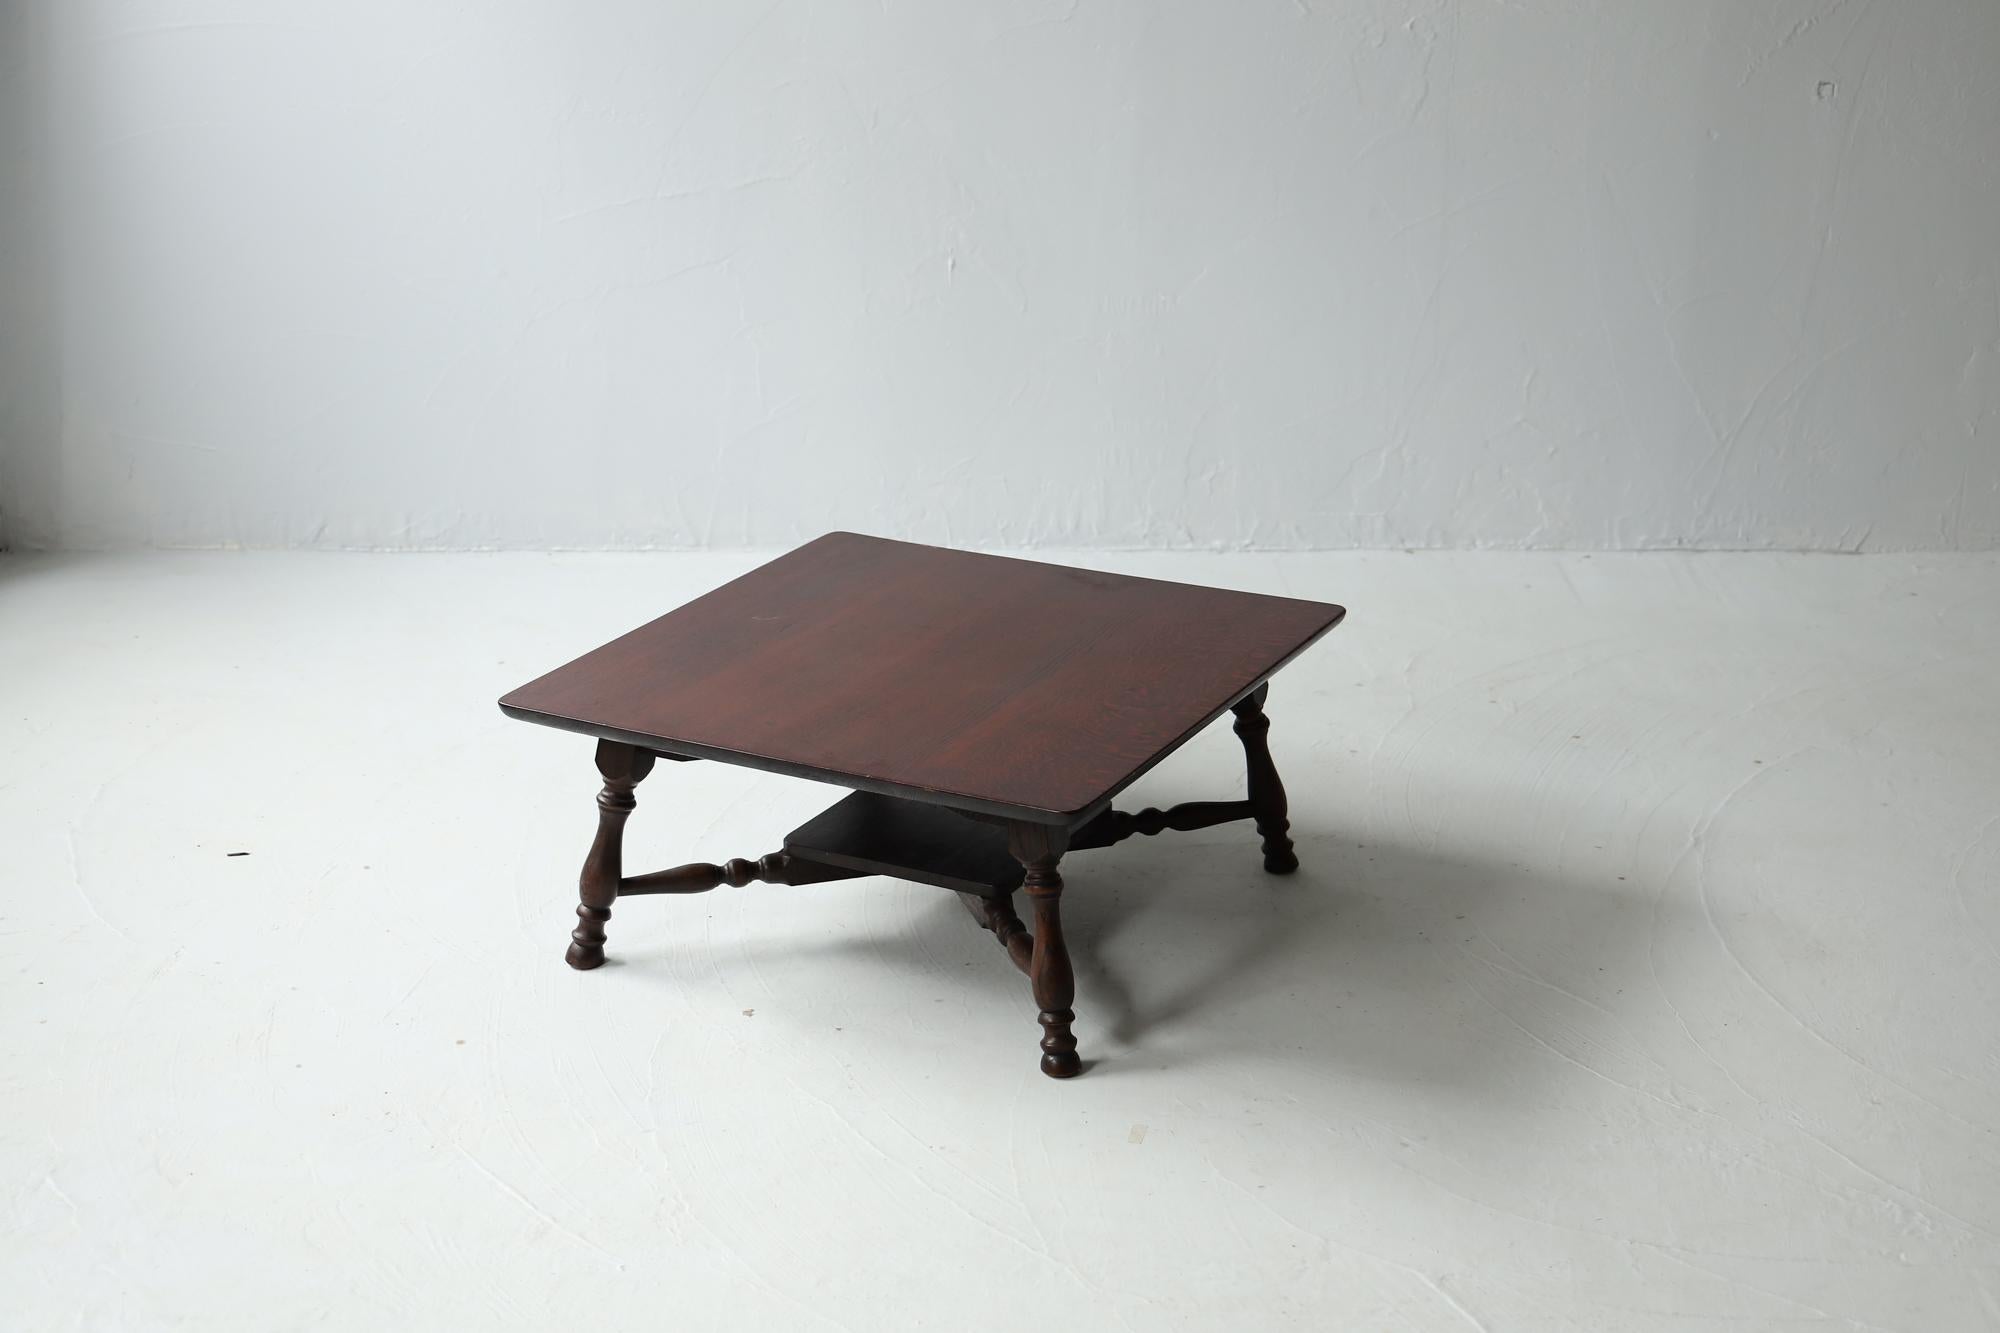 This is a Japanese antique coffee table produced in the Taisho period.

This furniture was made by applying traditional techniques used in Japanese shrines.

The material is high-quality oak. The grain of the wood is very beautiful.
The coating is a